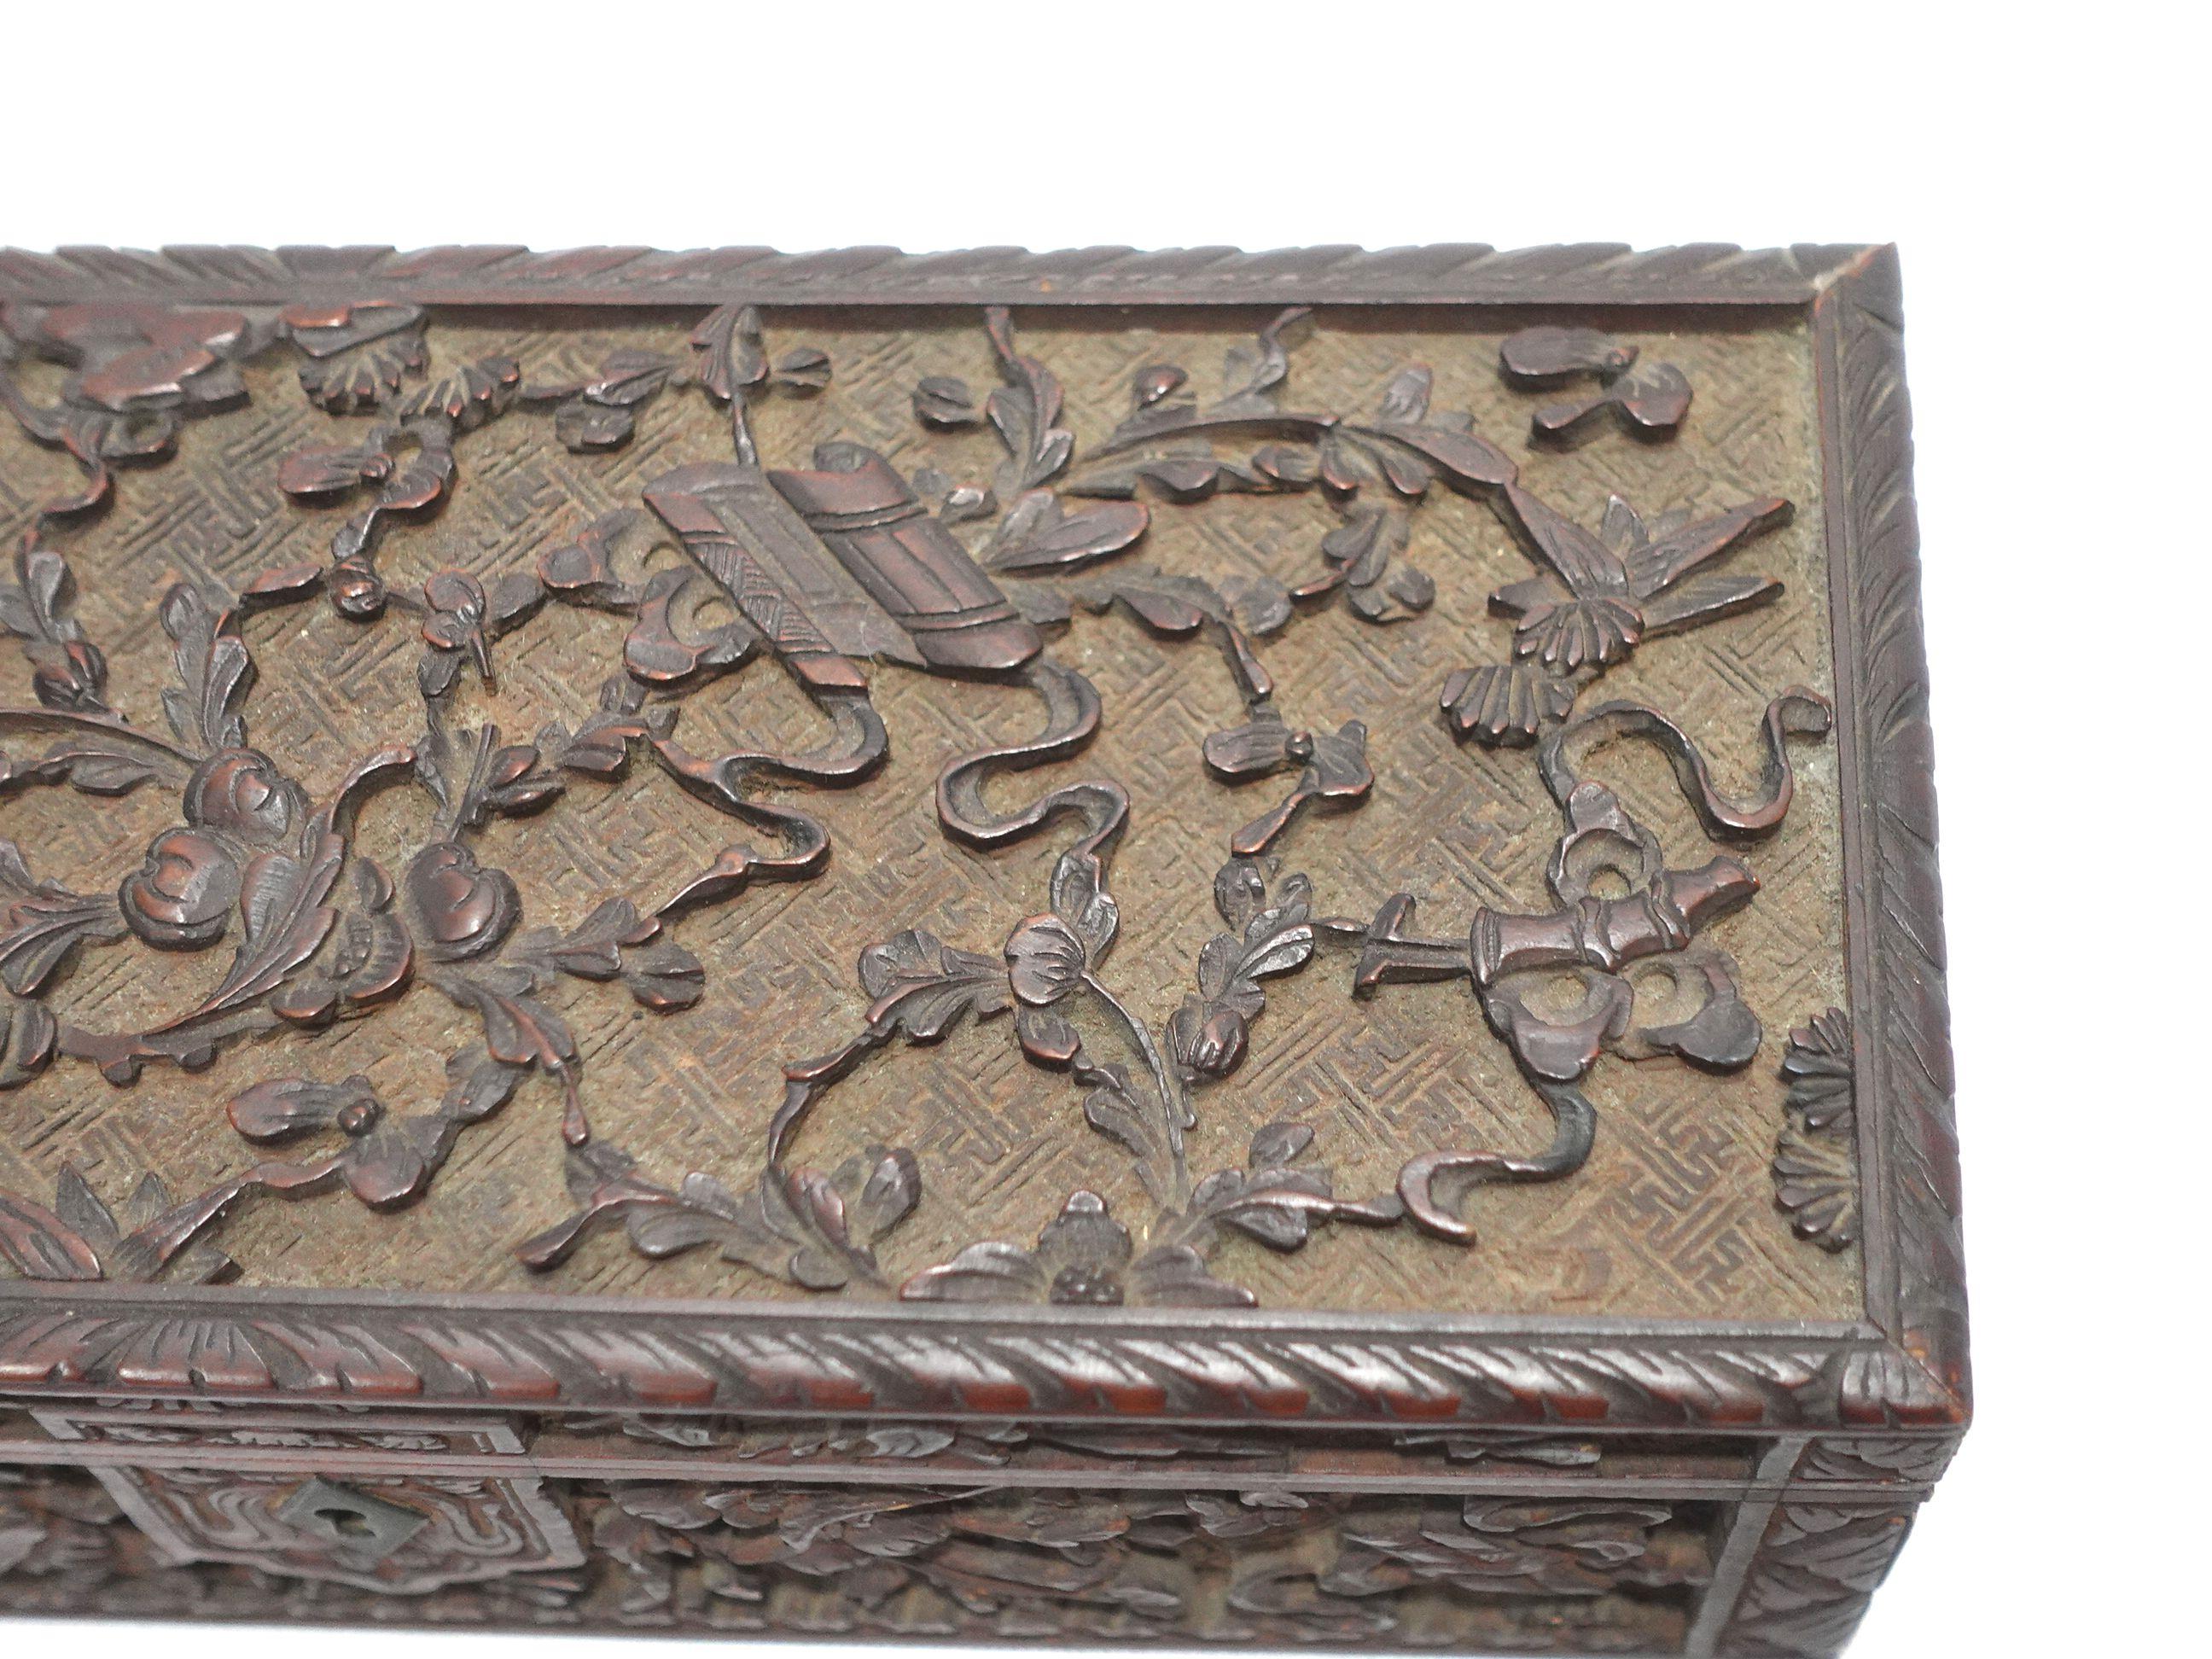 19th Century Antique Chinese Elaborately Relief Carved Glove Box W/ Original Hinges and Lock For Sale